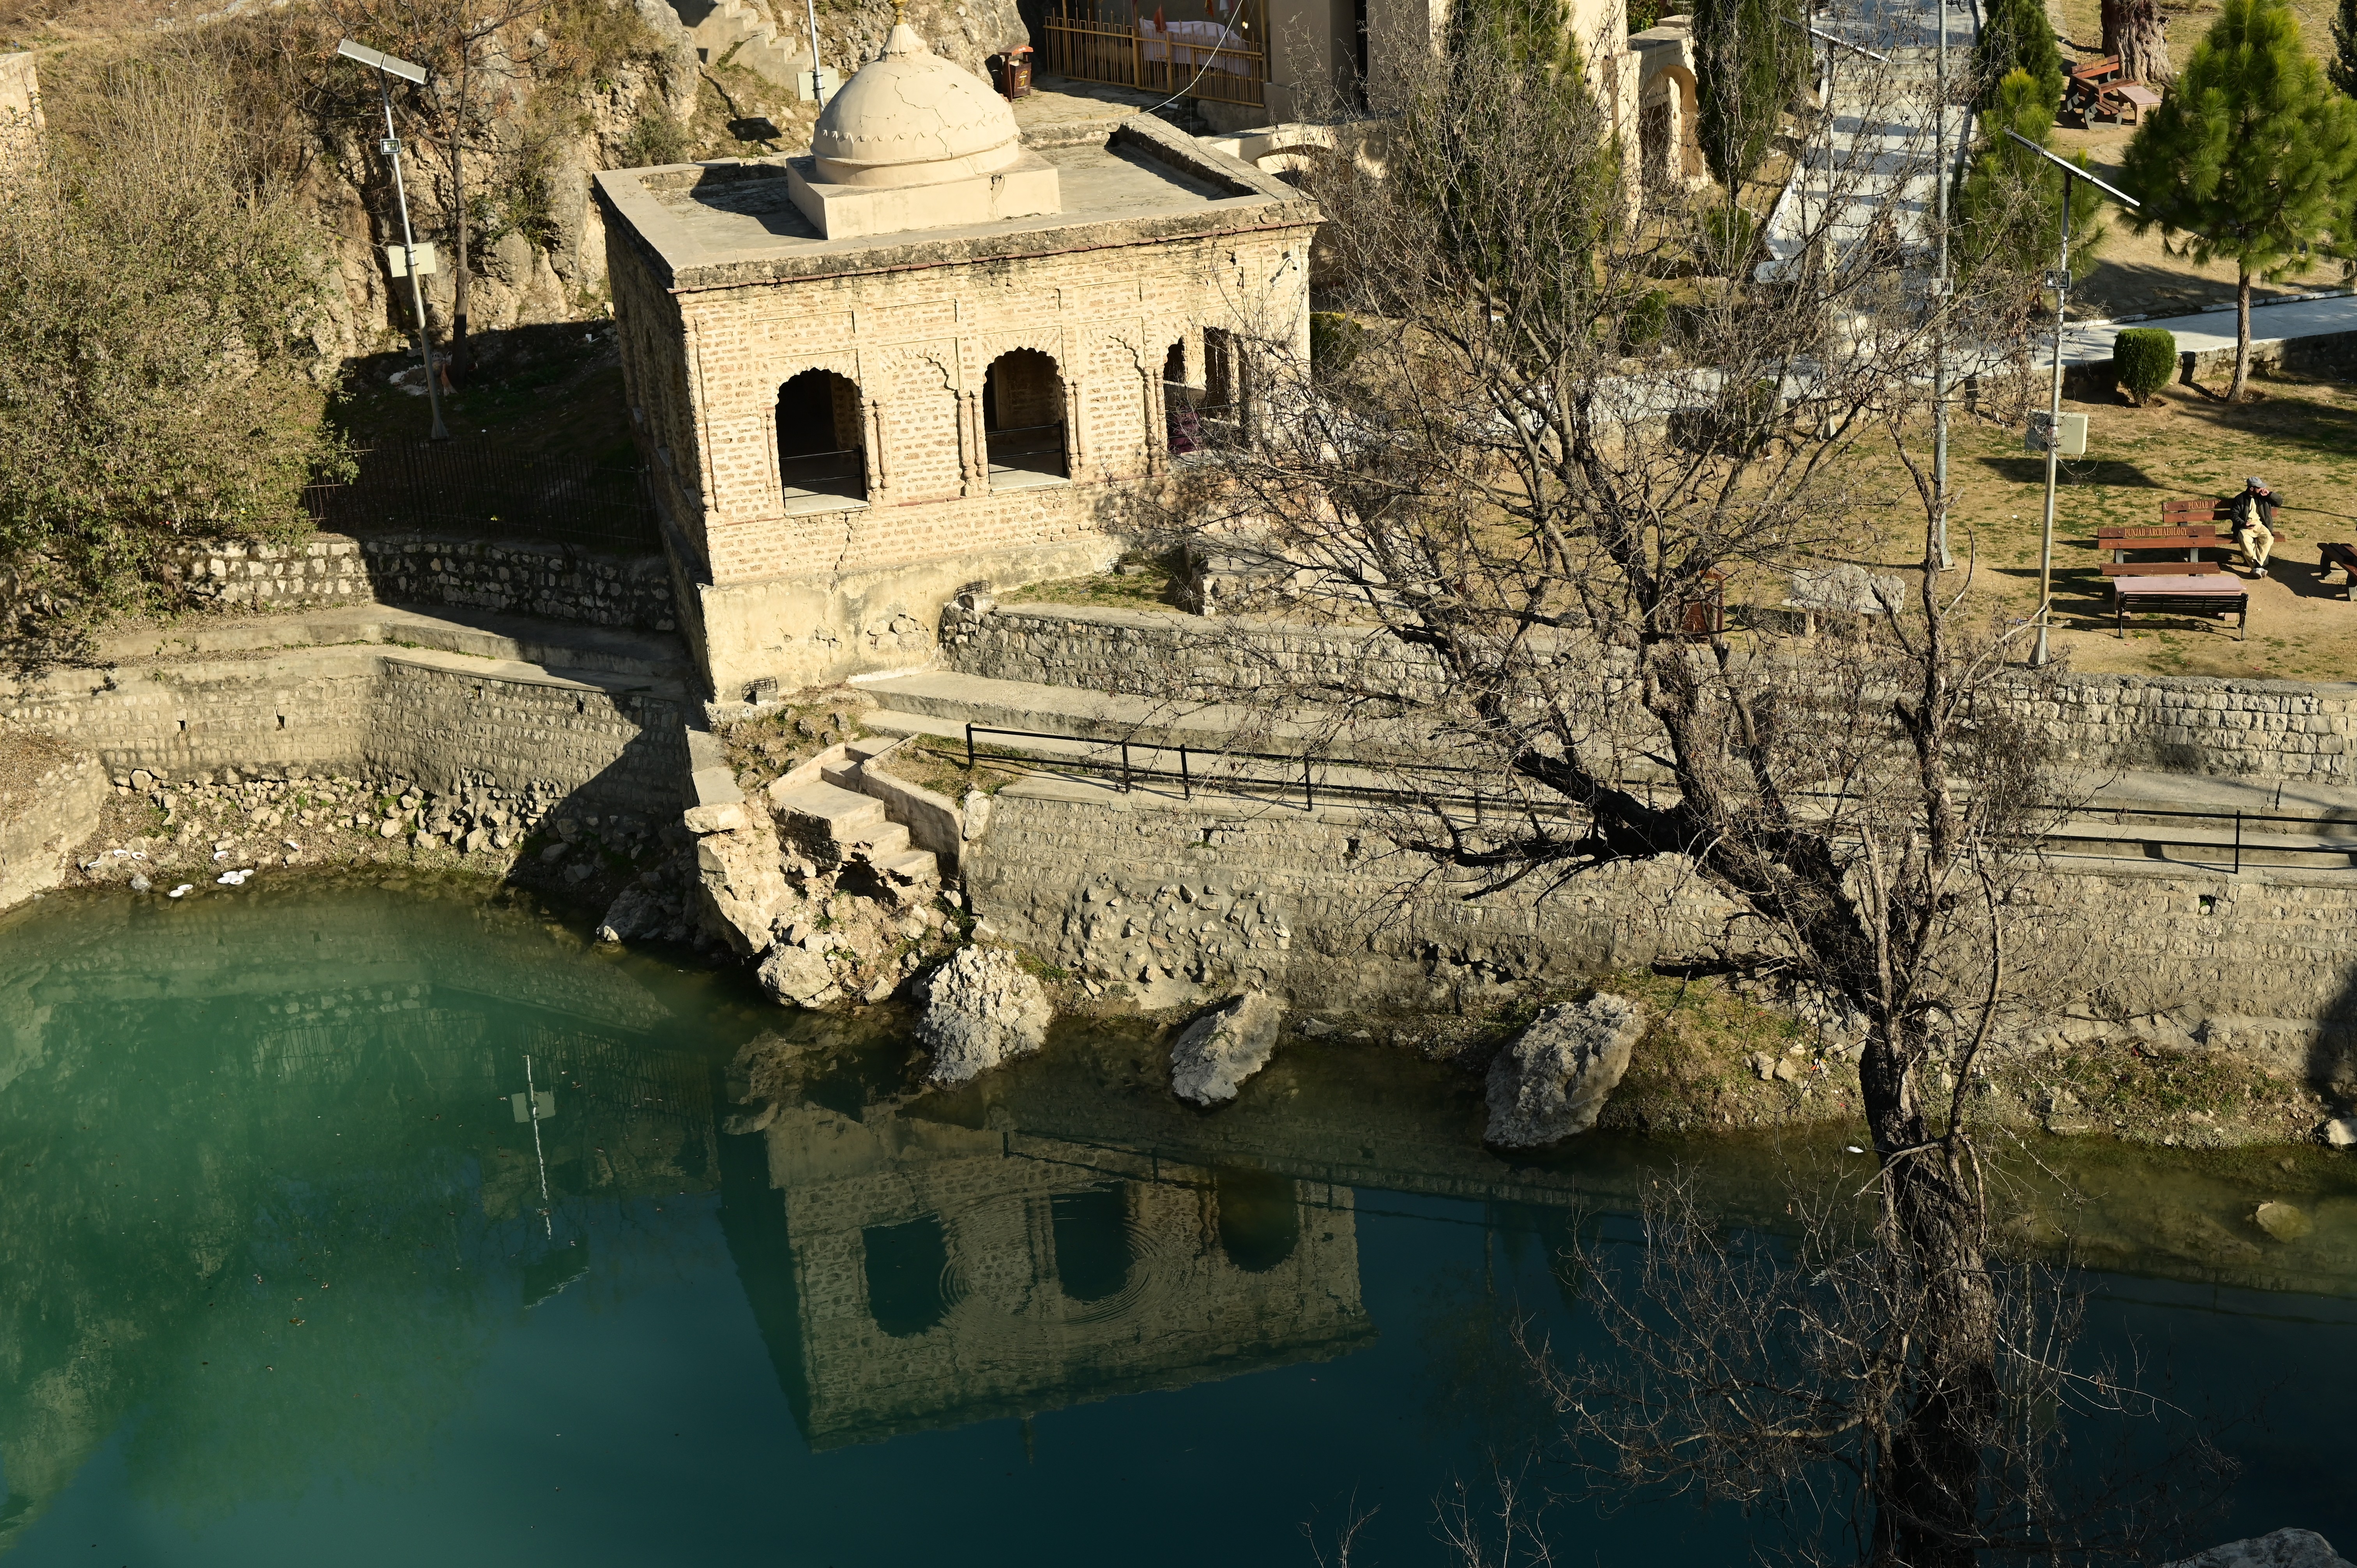 The Katas Raj Temples being reflected in the water pond, a place of cultural significance for the Hindu community, and also a part of  national heritage